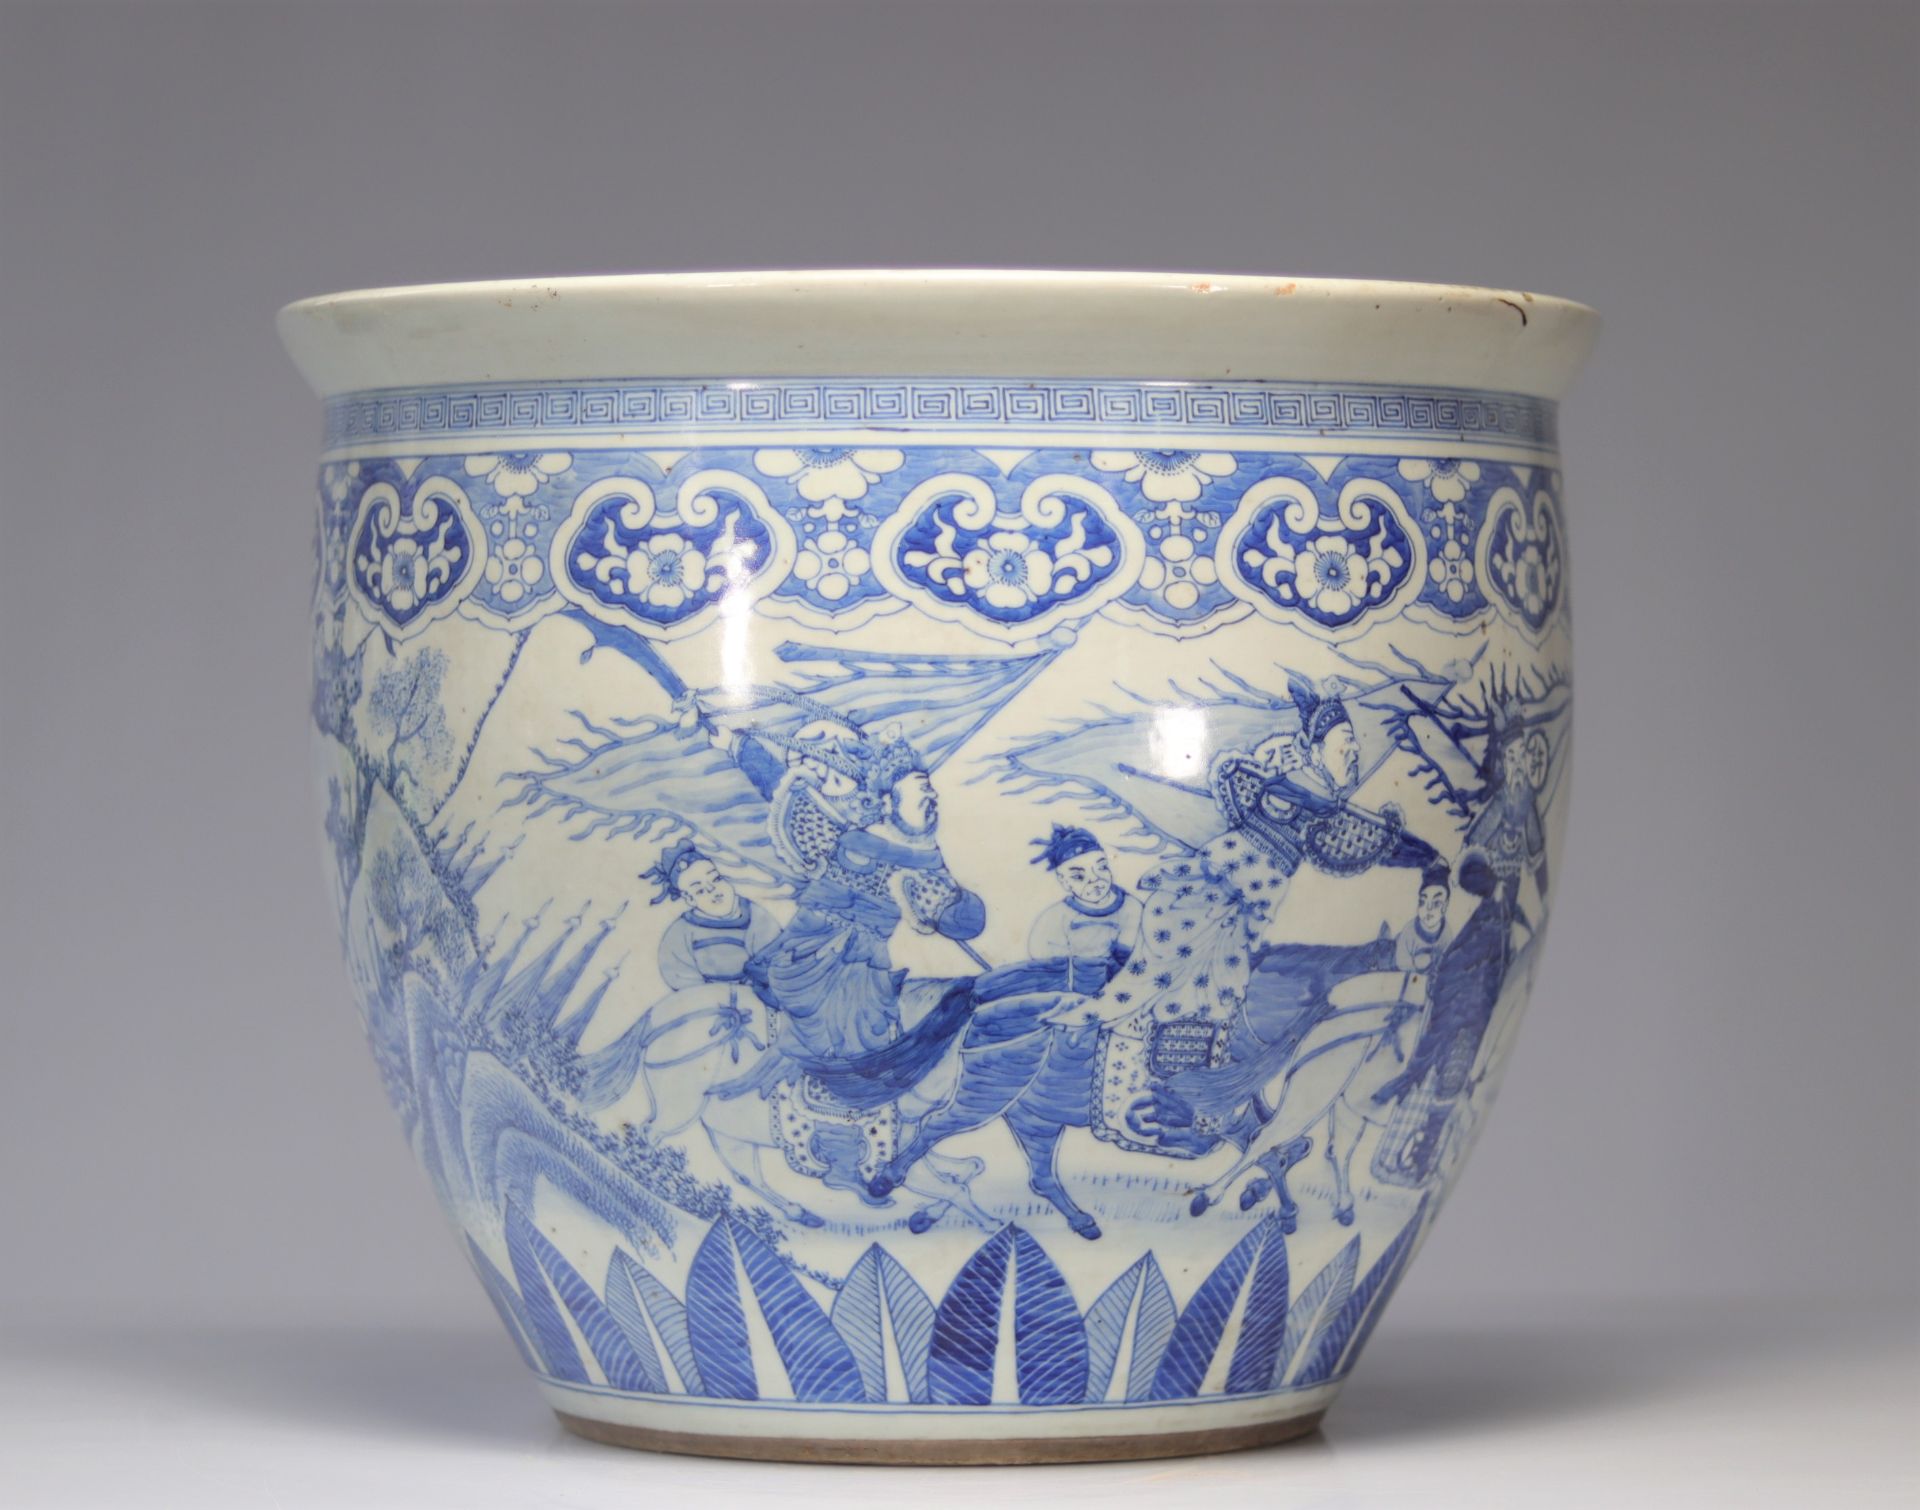 Imposing blue-white porcelain vase decorated with Qing period warriors - Image 4 of 6